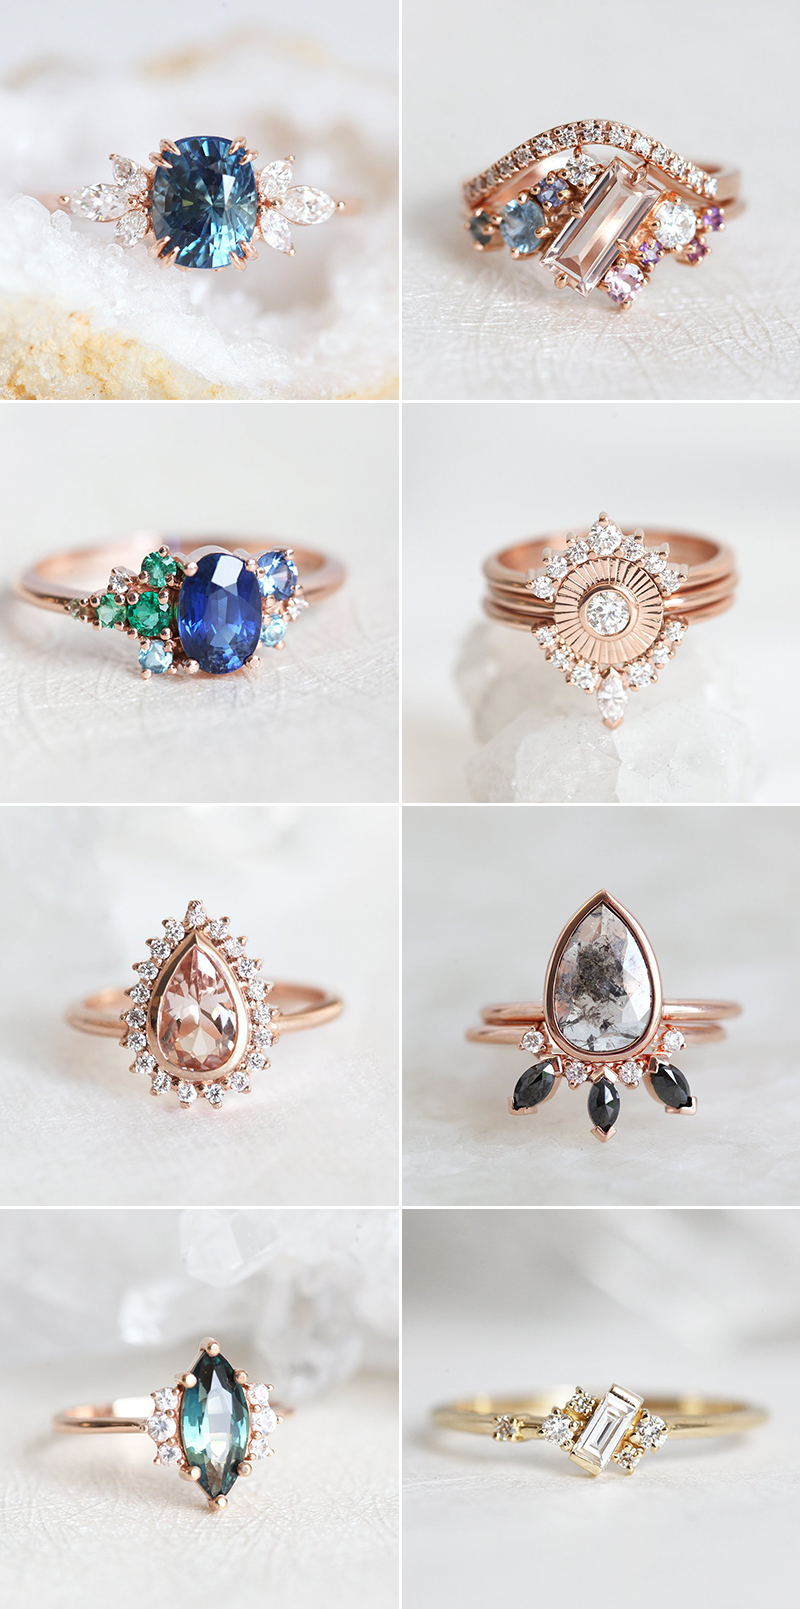 Alternative Hand-crafted Non-Traditional Engagement Rings 